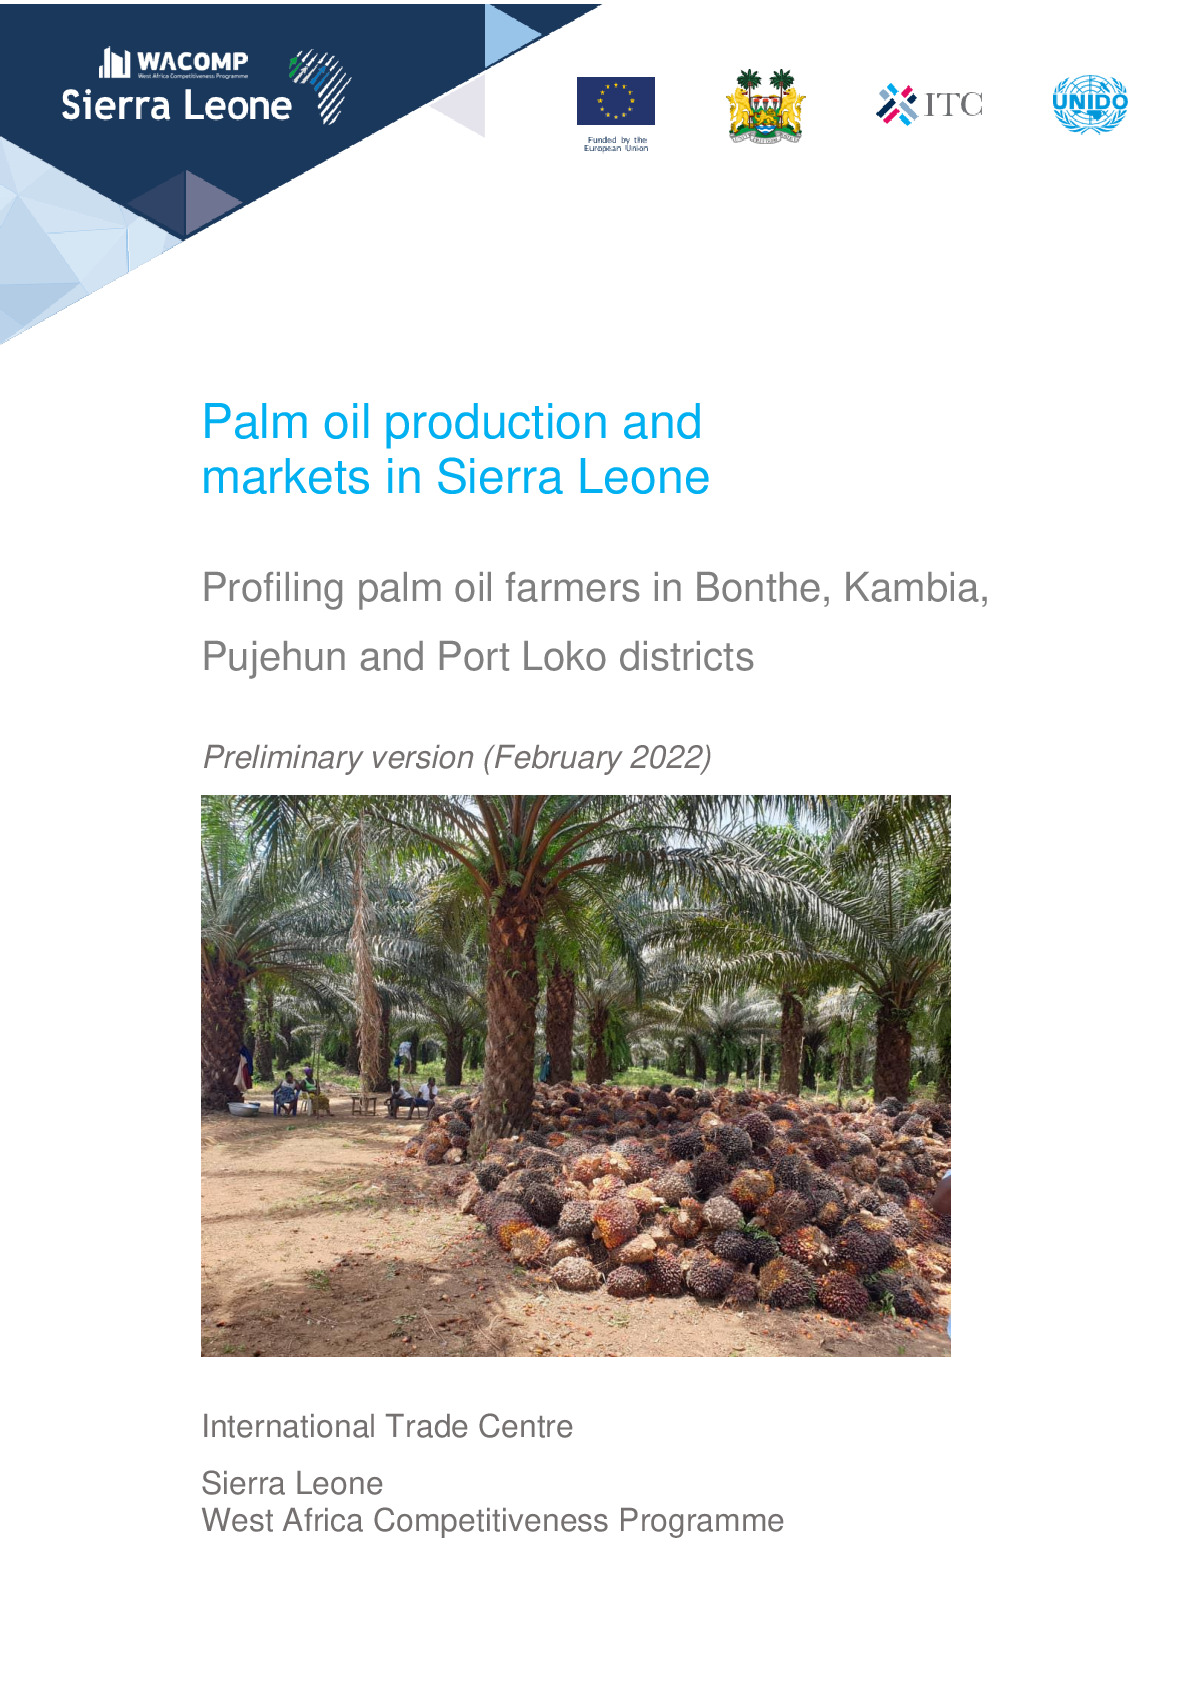 oil_palm_production_and_market_in_sierra_leone_02.2022